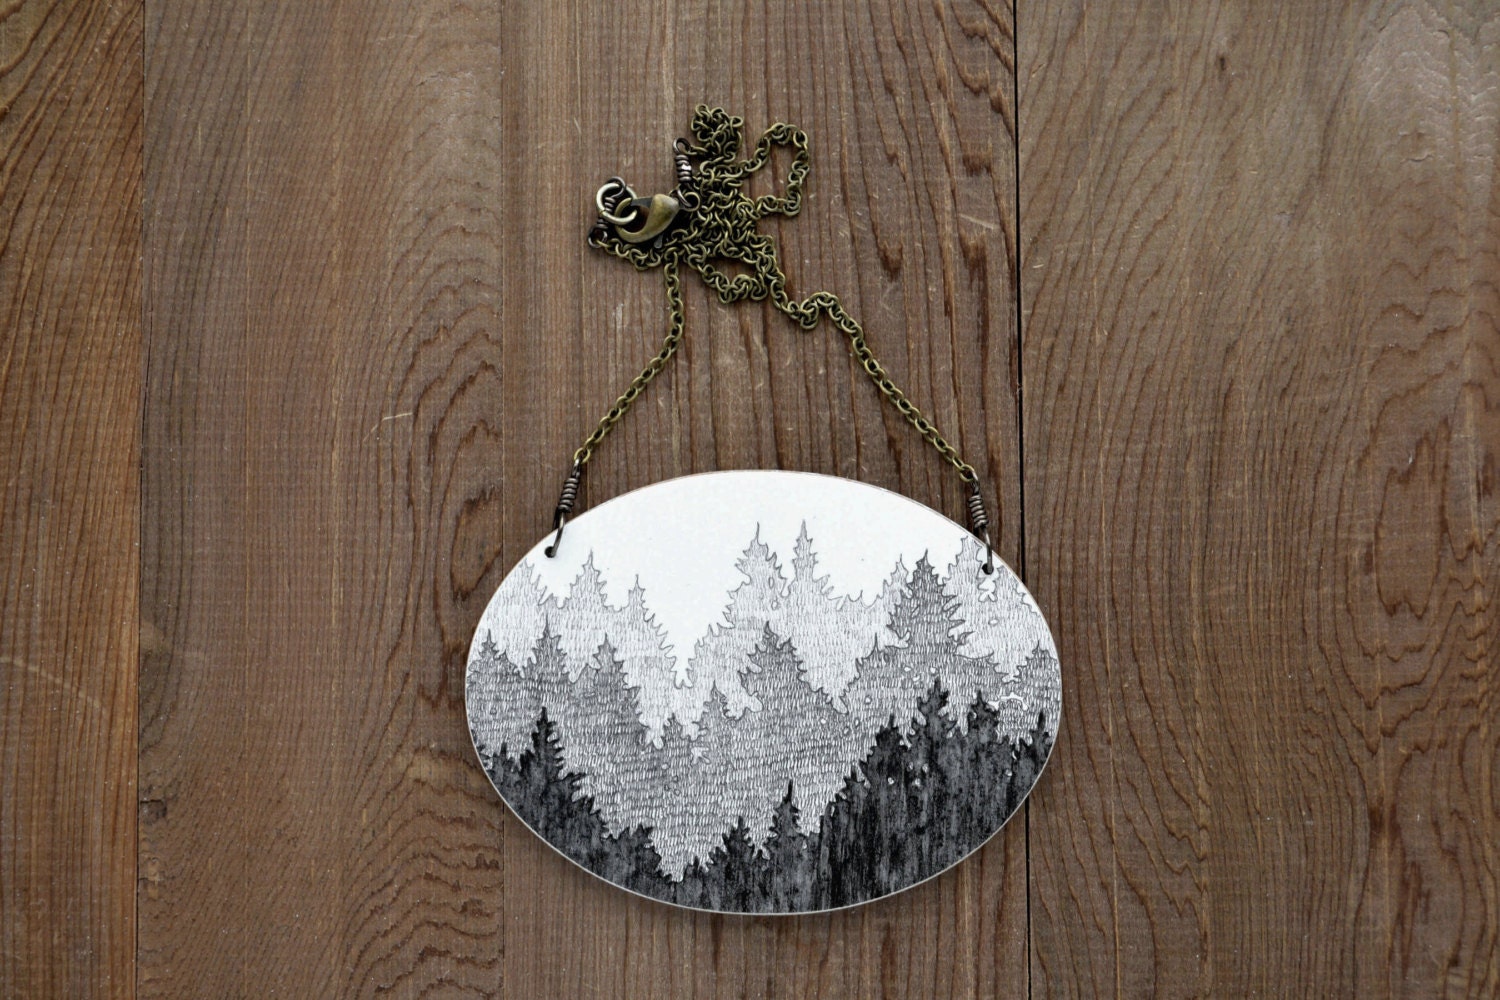 Large Boreal Necklace in Antique Black and Graphite - Hand Painted Tree Artwork Pendant - MeghannRader